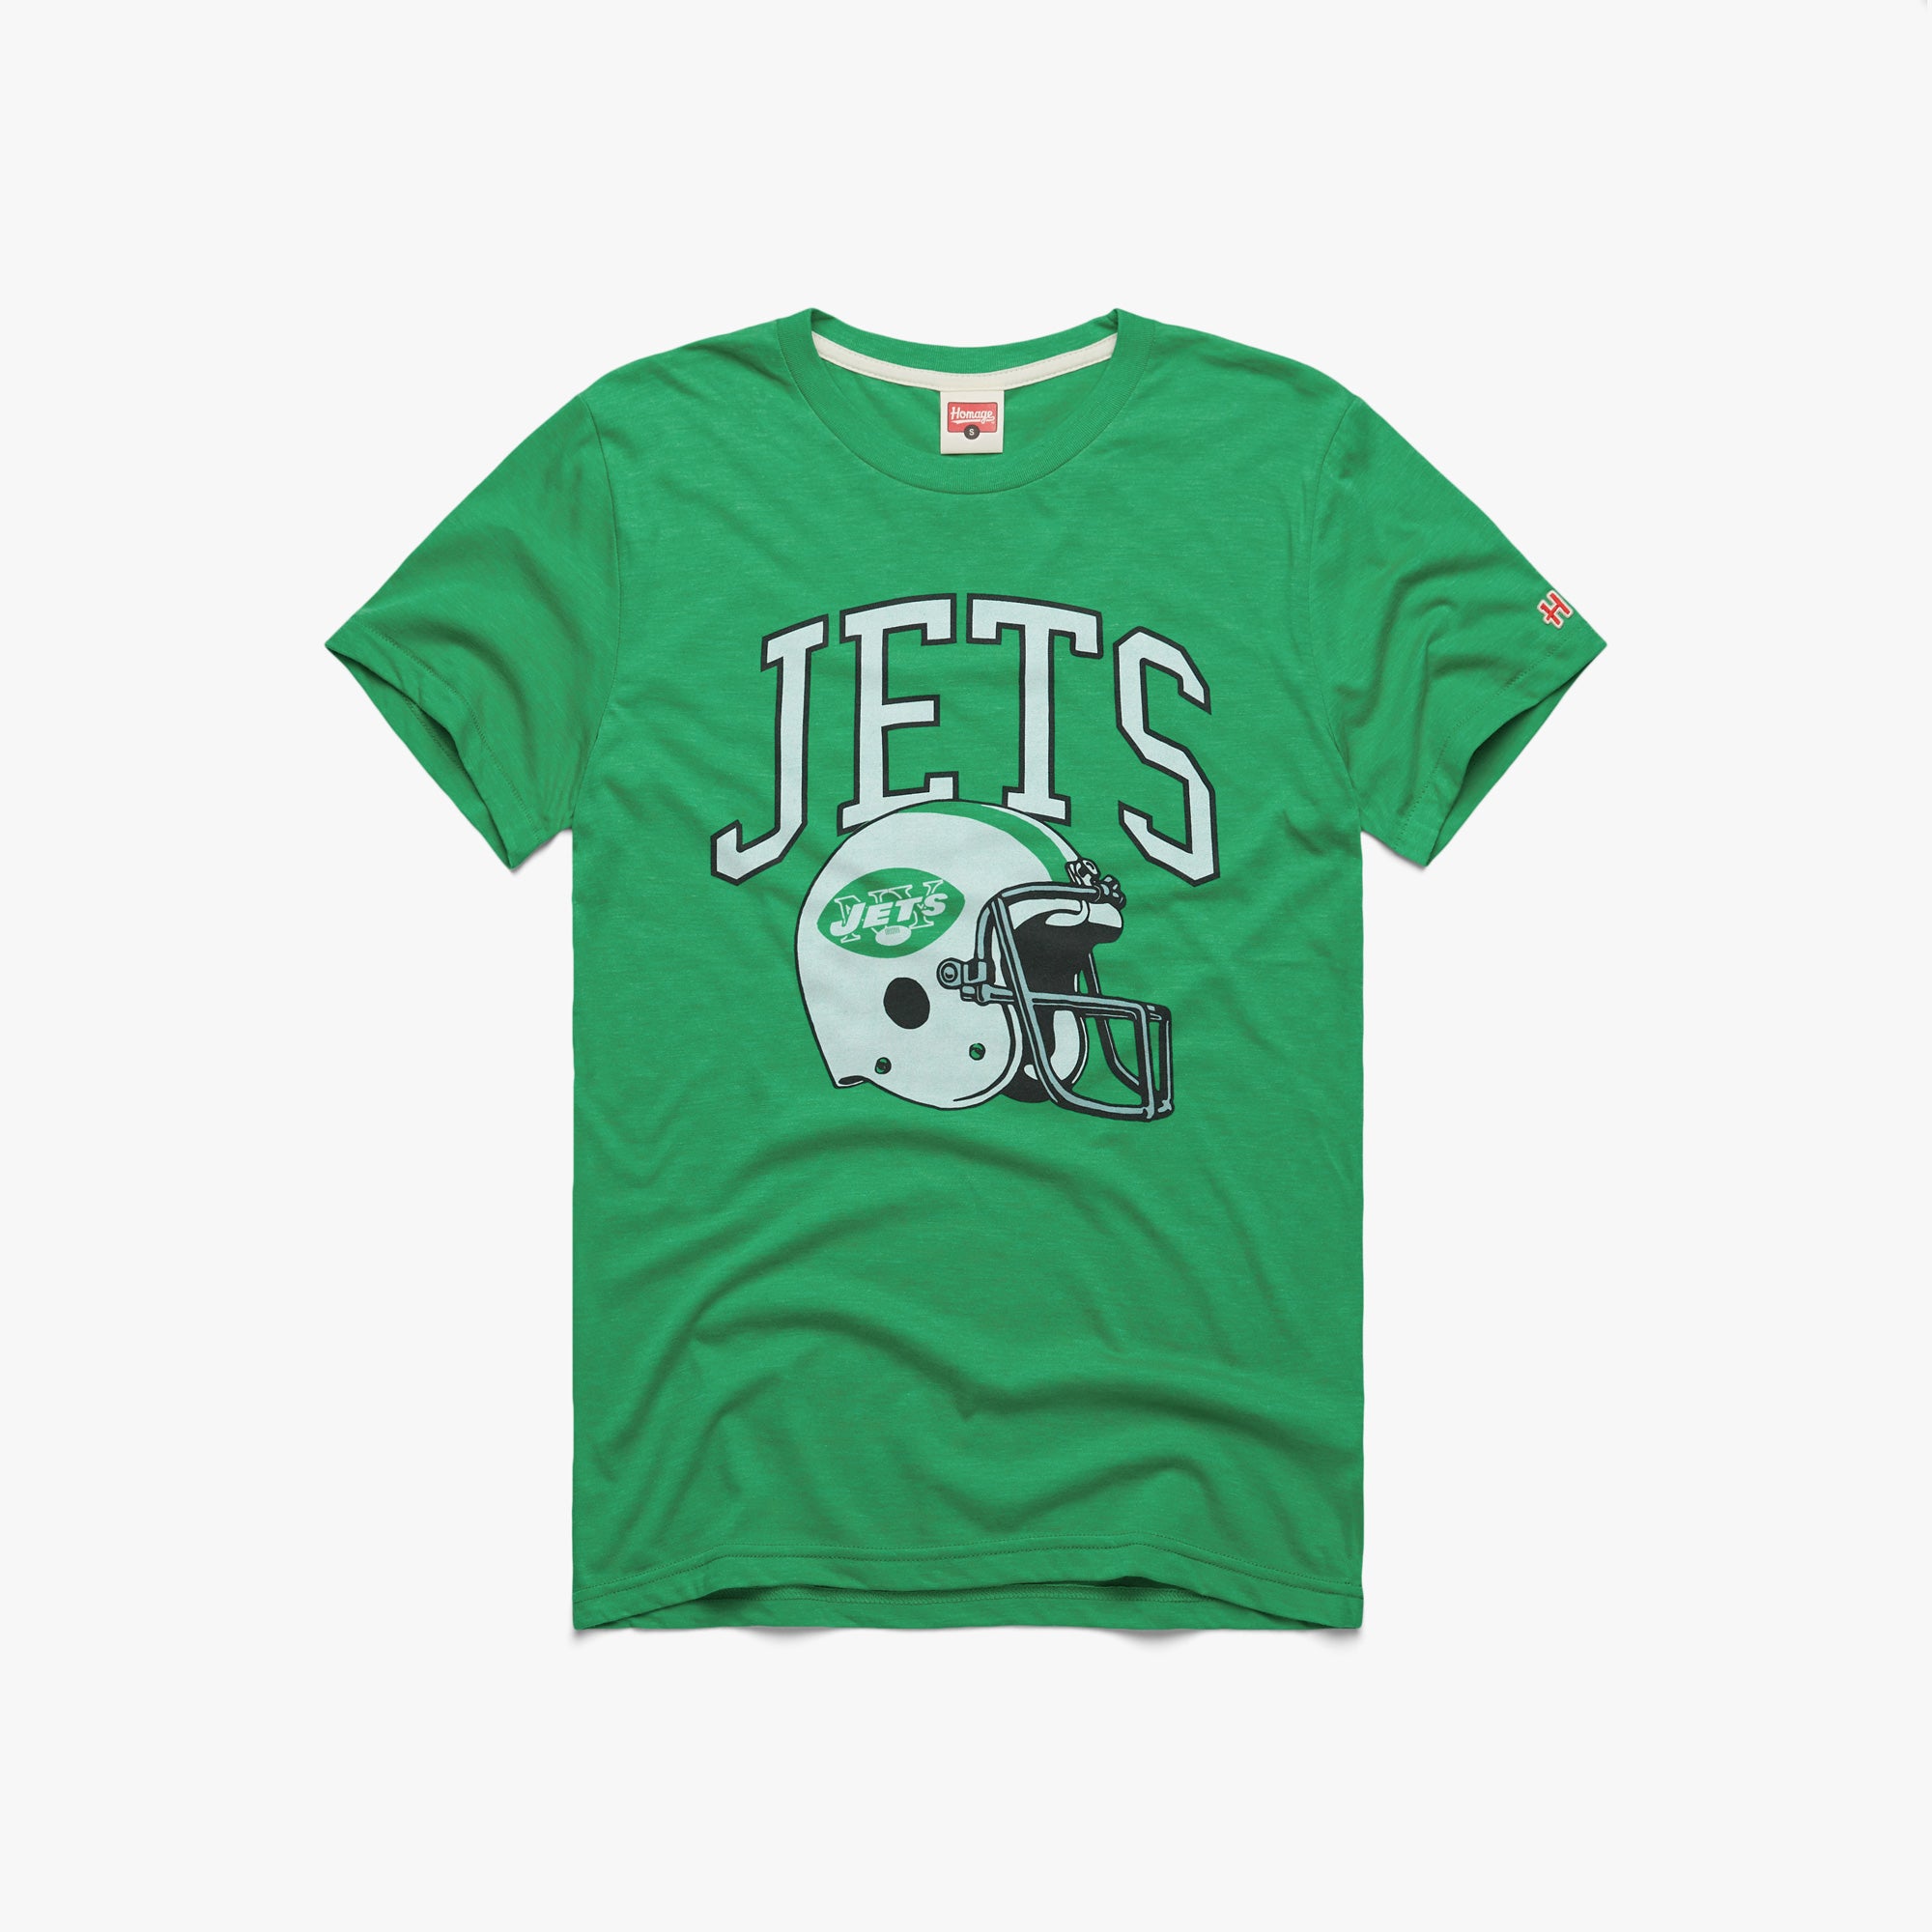 Jets Shop: New York Jets Gifts, Apparel, NY Jets Gear and Merchandise